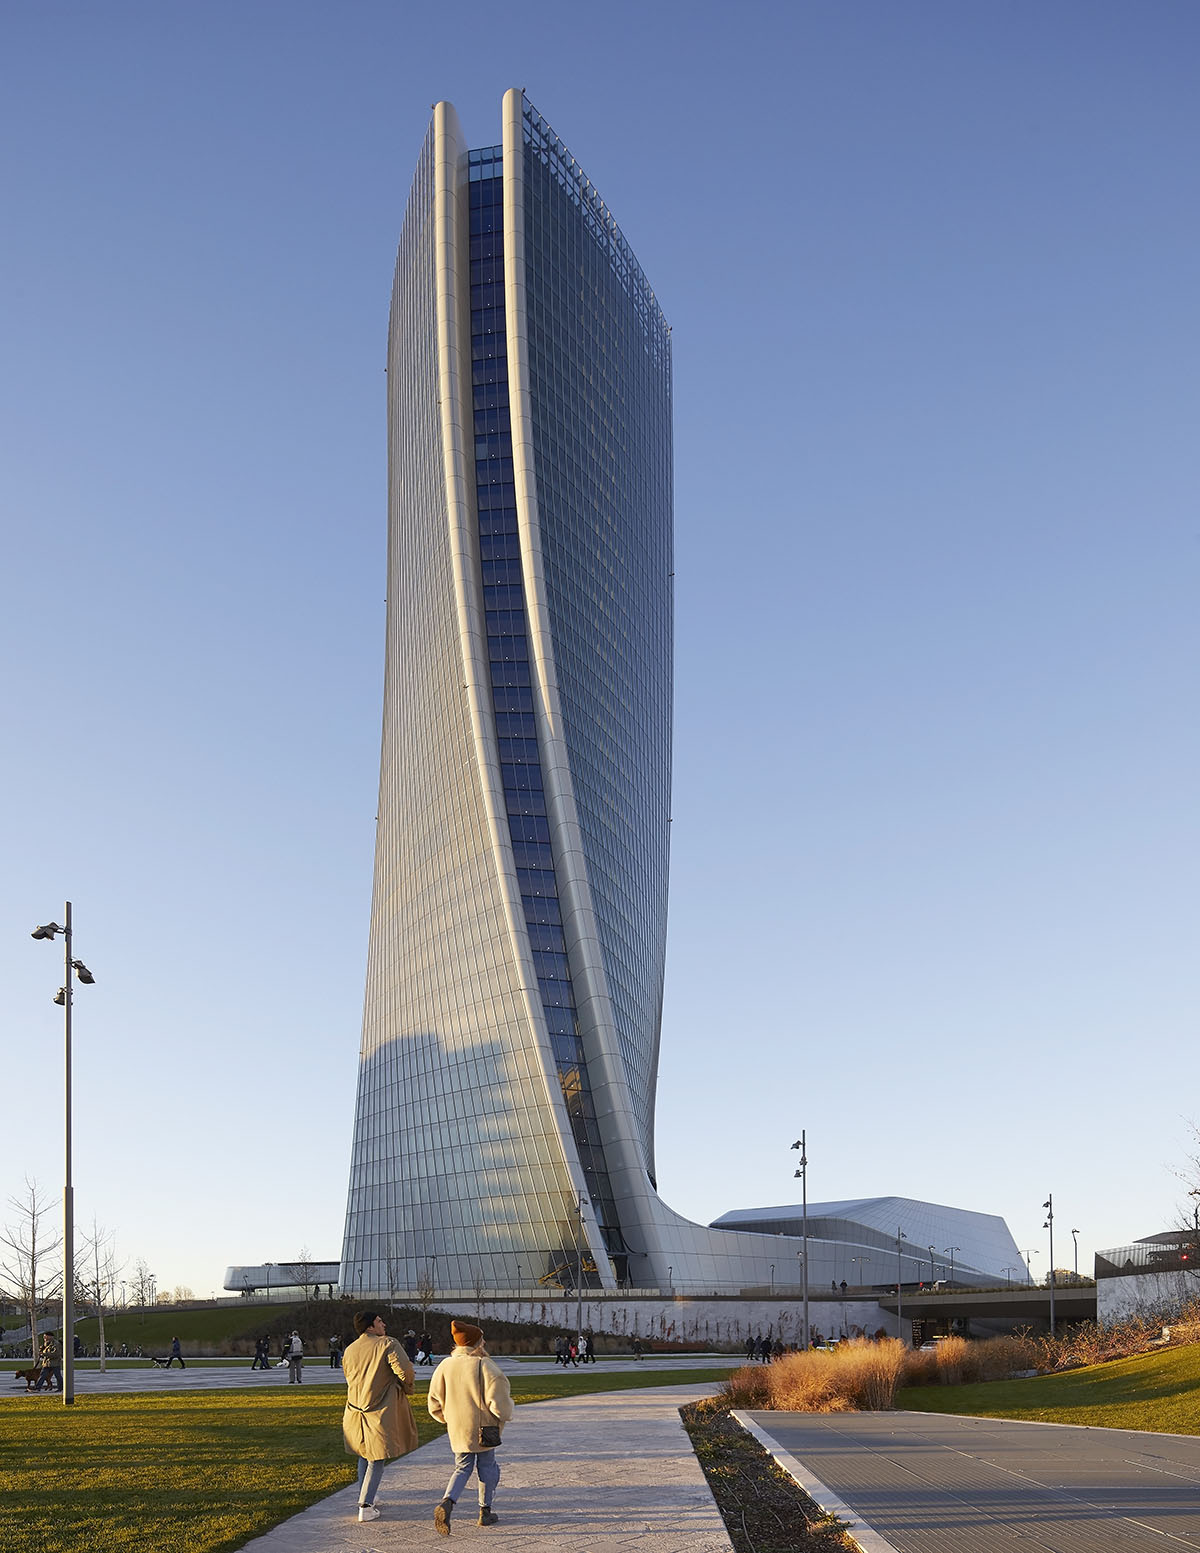 Zaha Hadid Architects' twisted Generali Tower in Milan photographed by Hufton+Crow